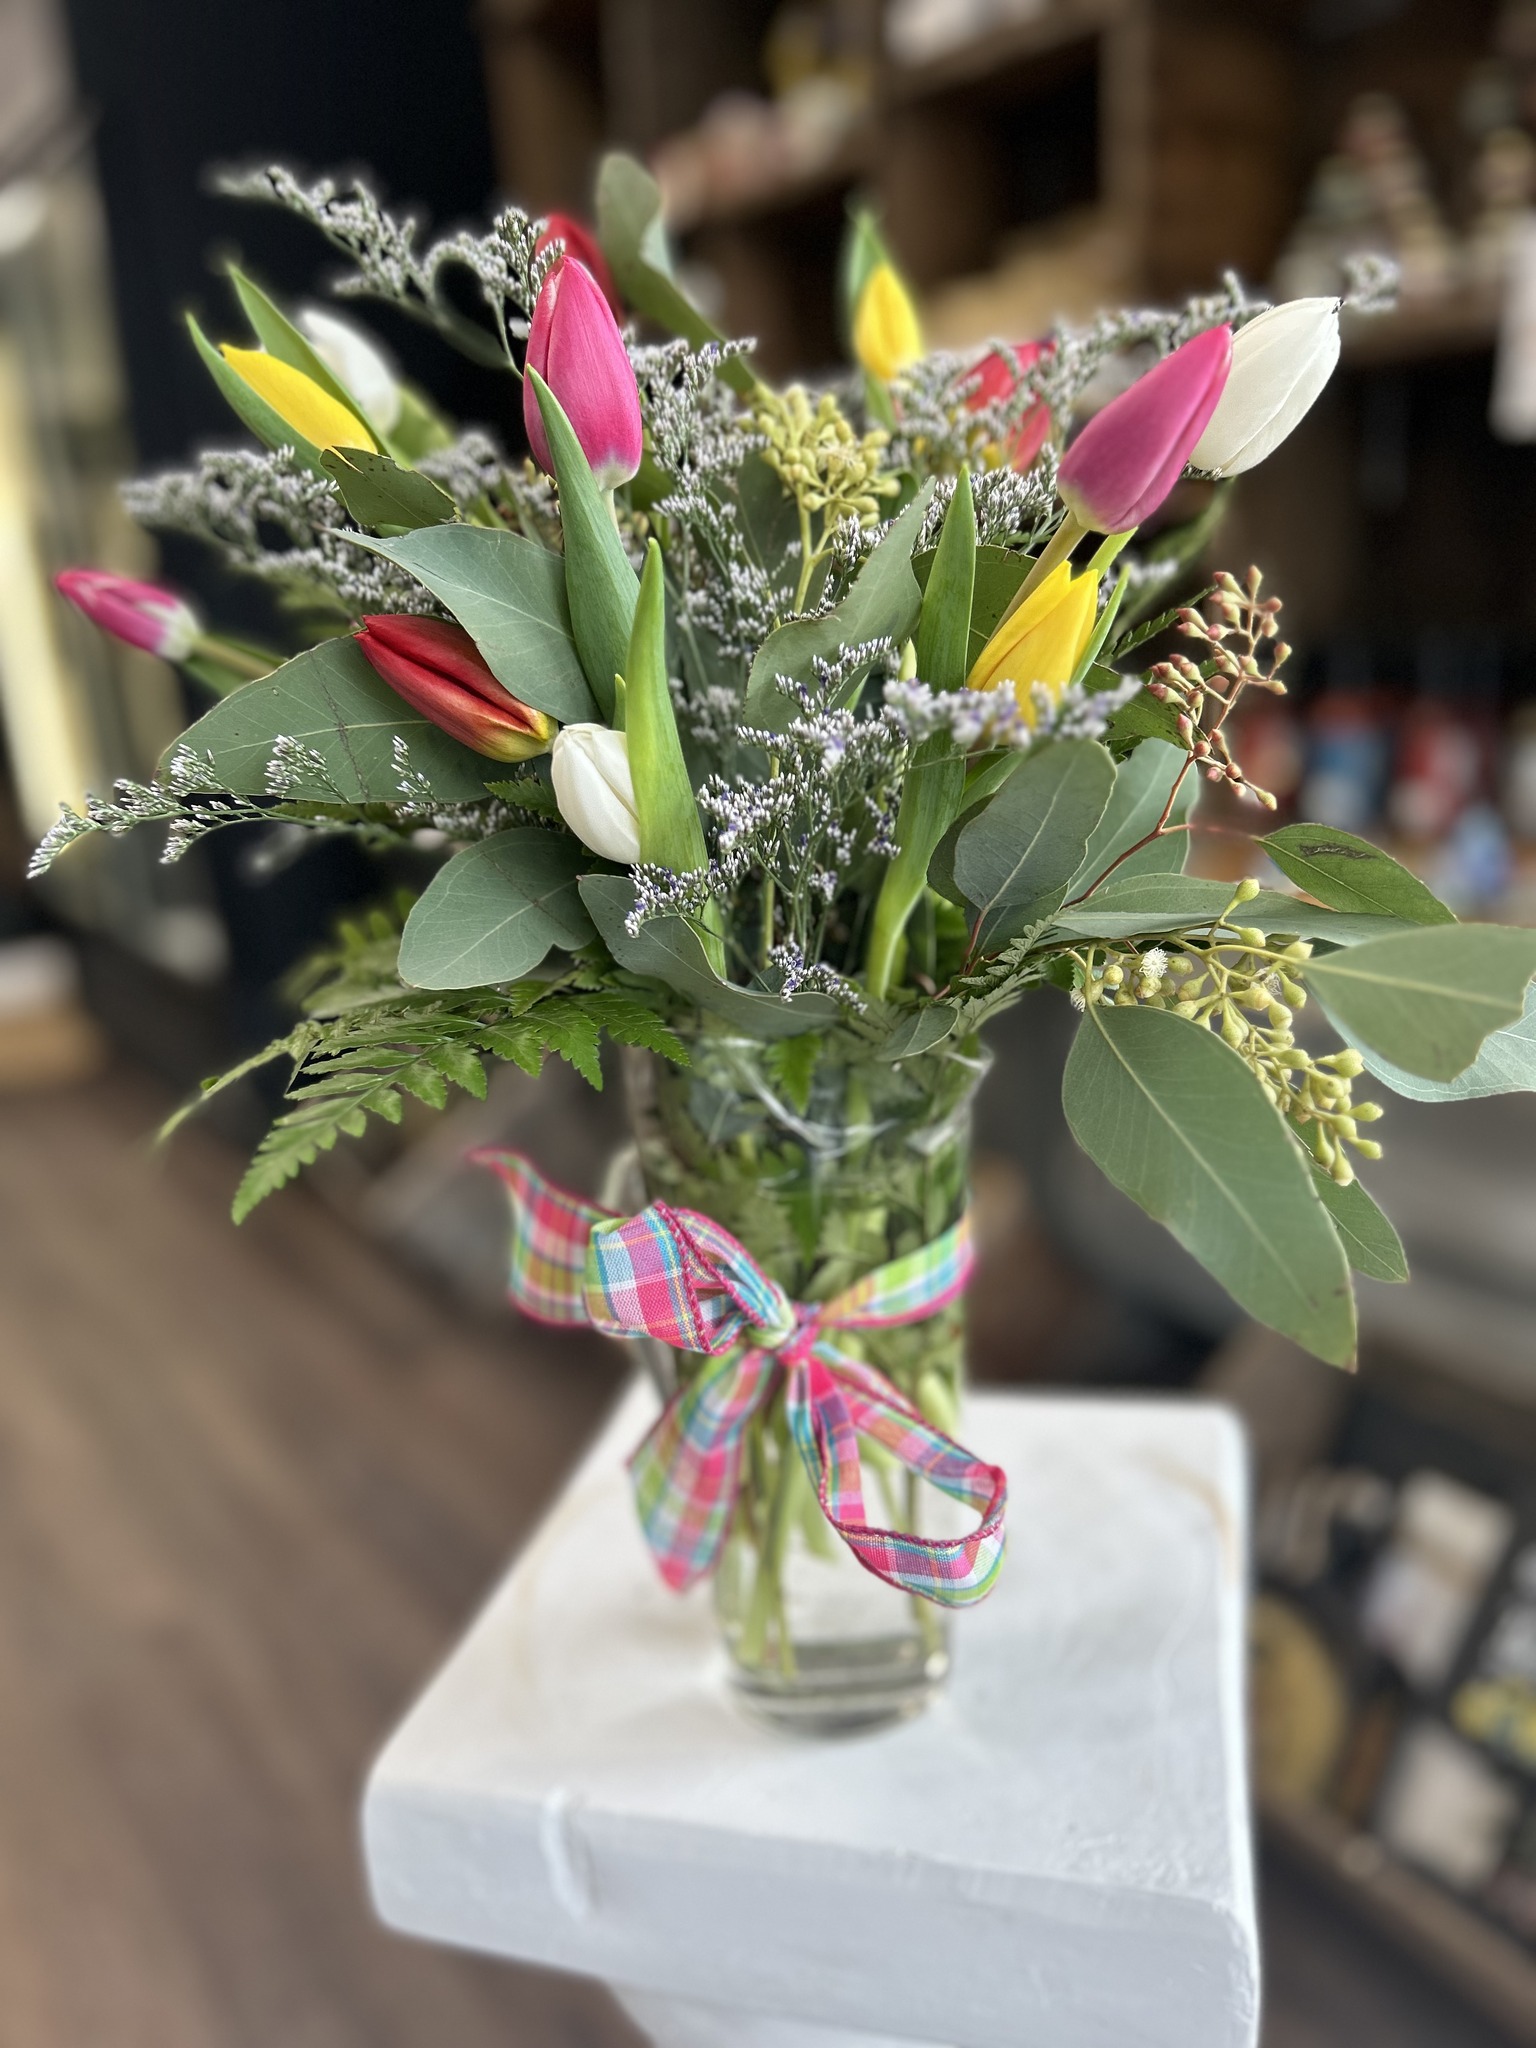 Emslie the Florist and Gifts 260 N Main St Suite 20, Barre Vermont 05641